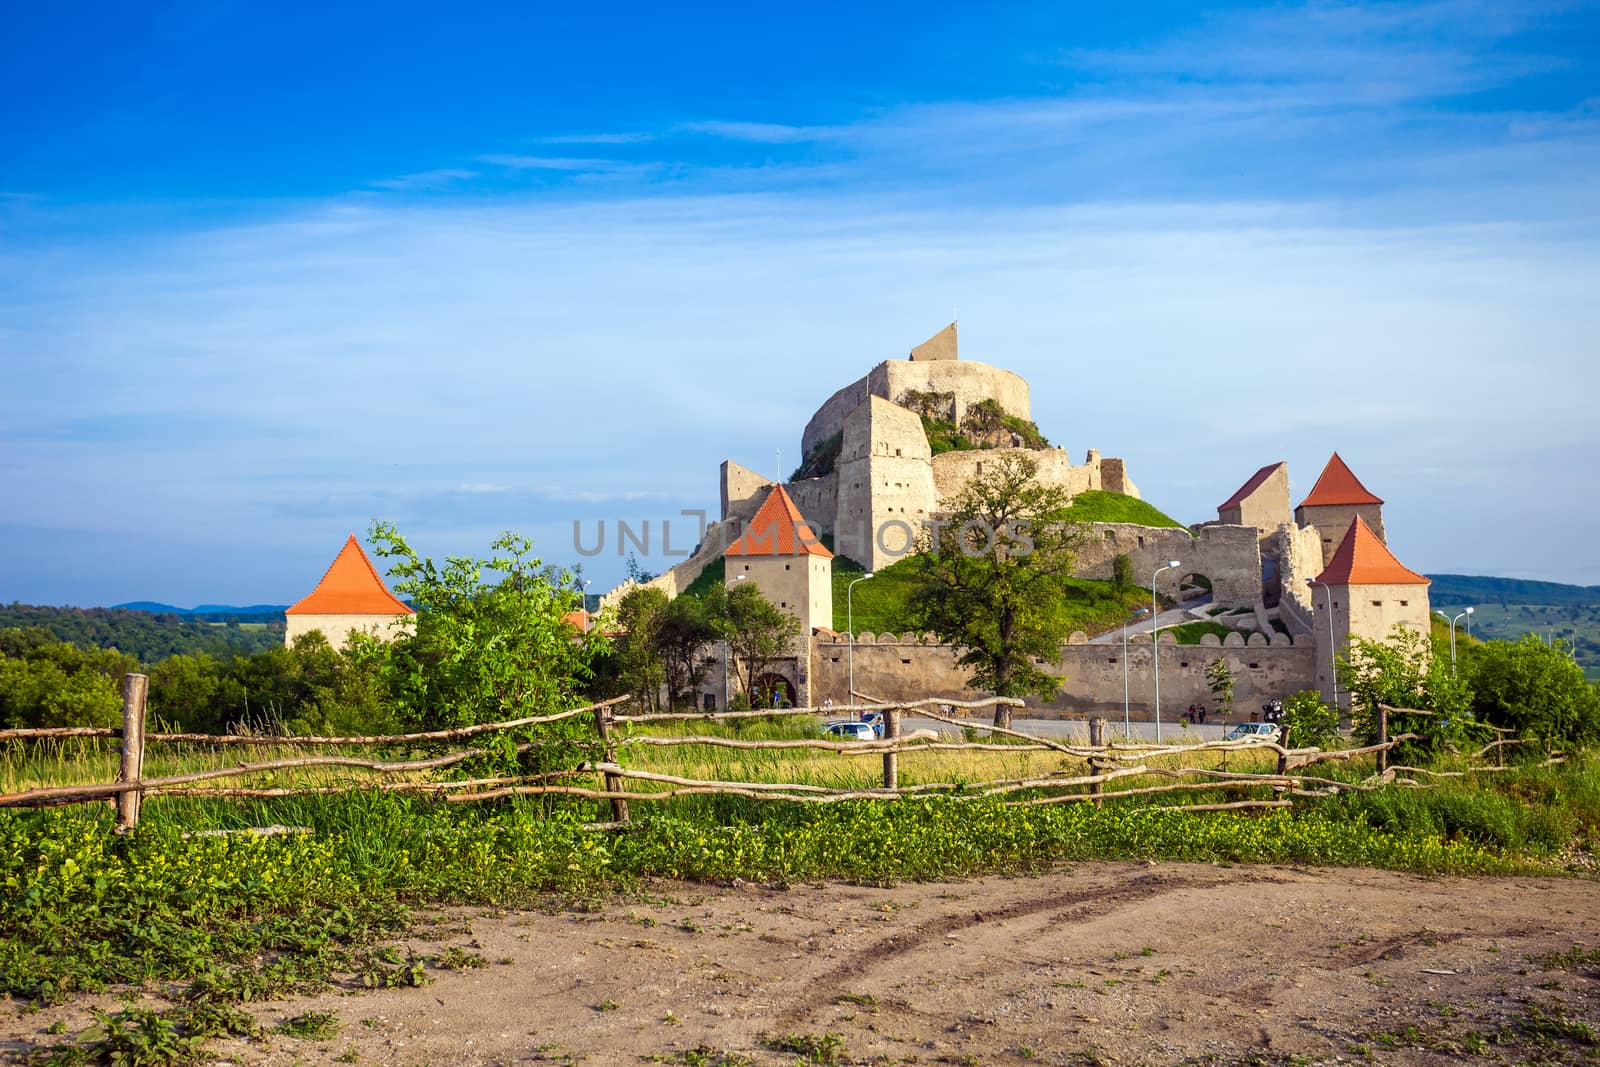 Rupea, Romania - June 23, 2013: Tourists visiting the old medieval fortress on top of the hill, Rupea village located in Transylvania, Romania